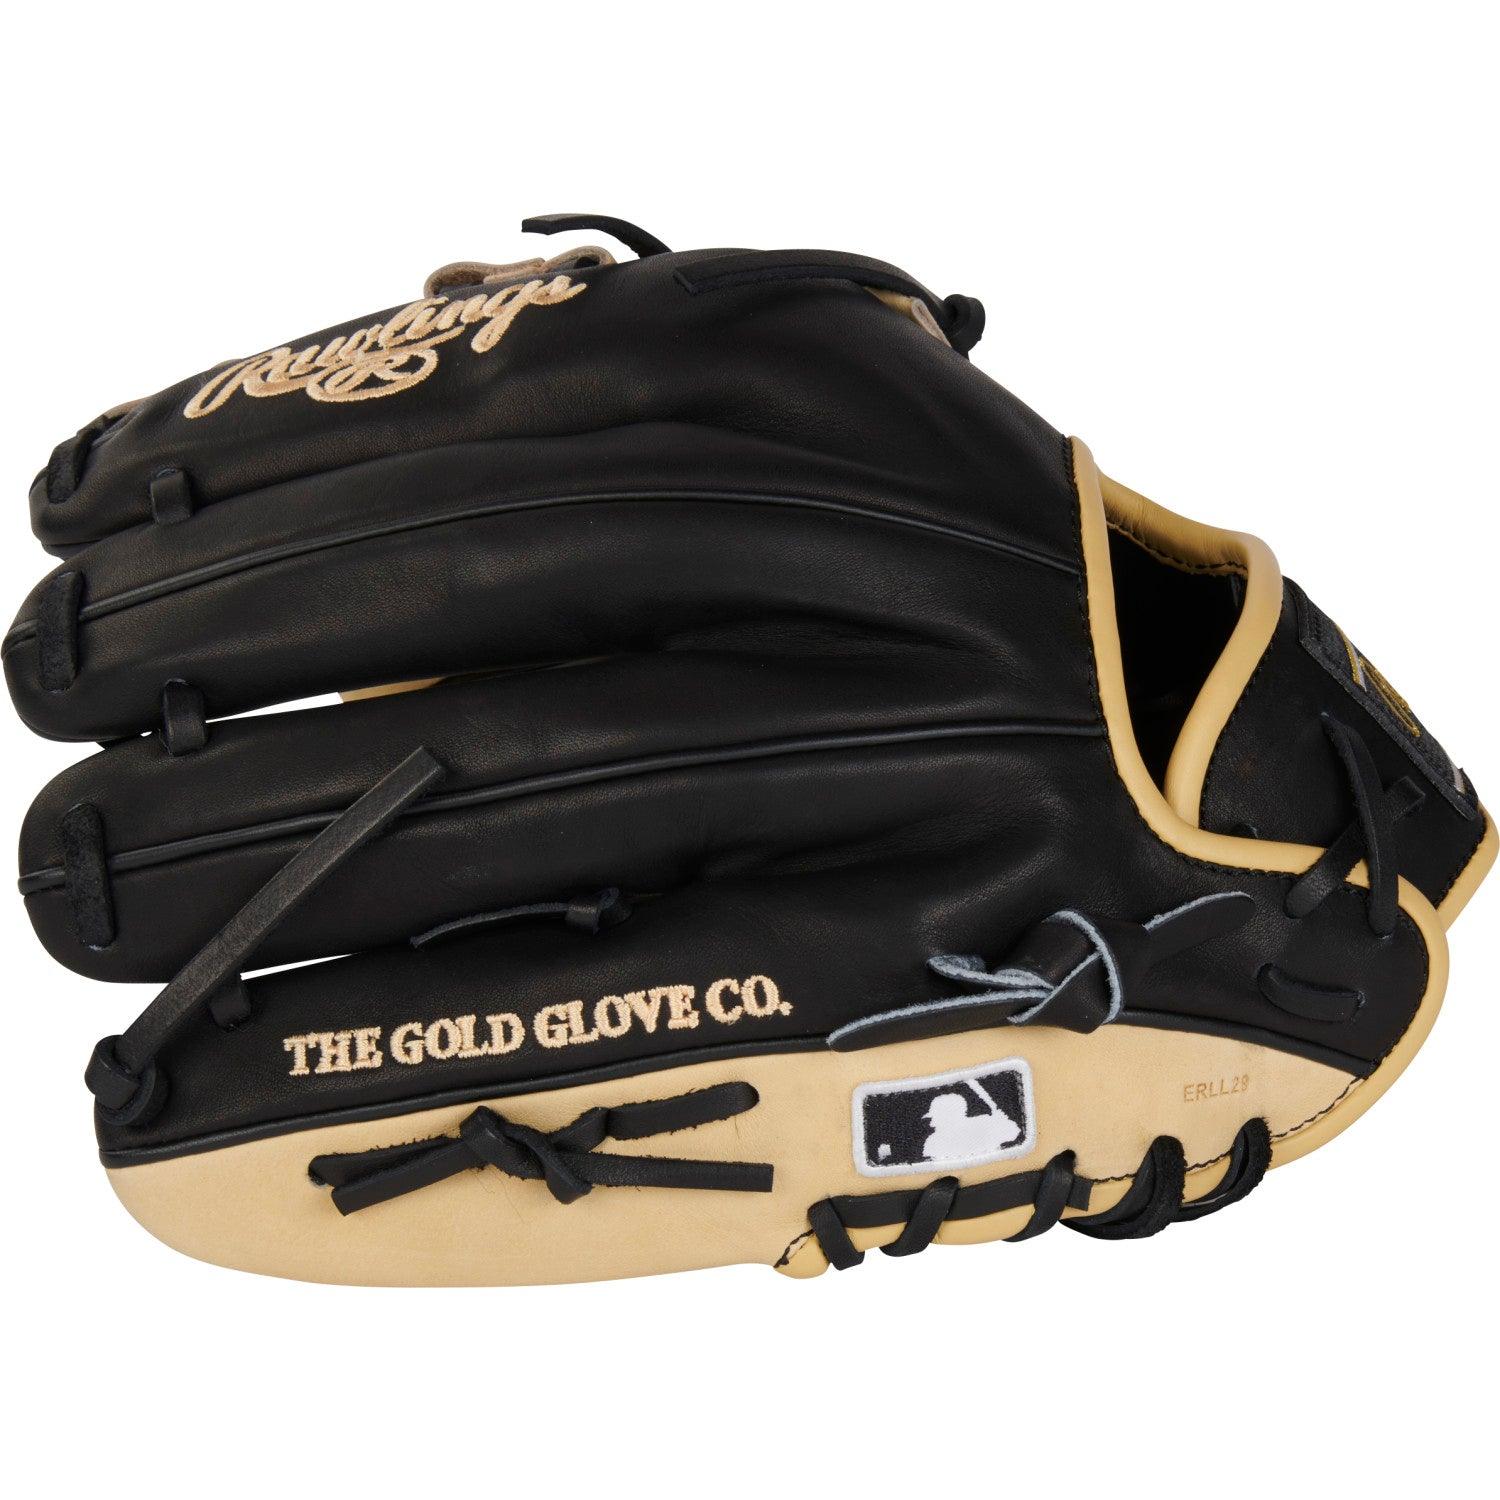 2024 Rawlings Heart of The Hide 11.75